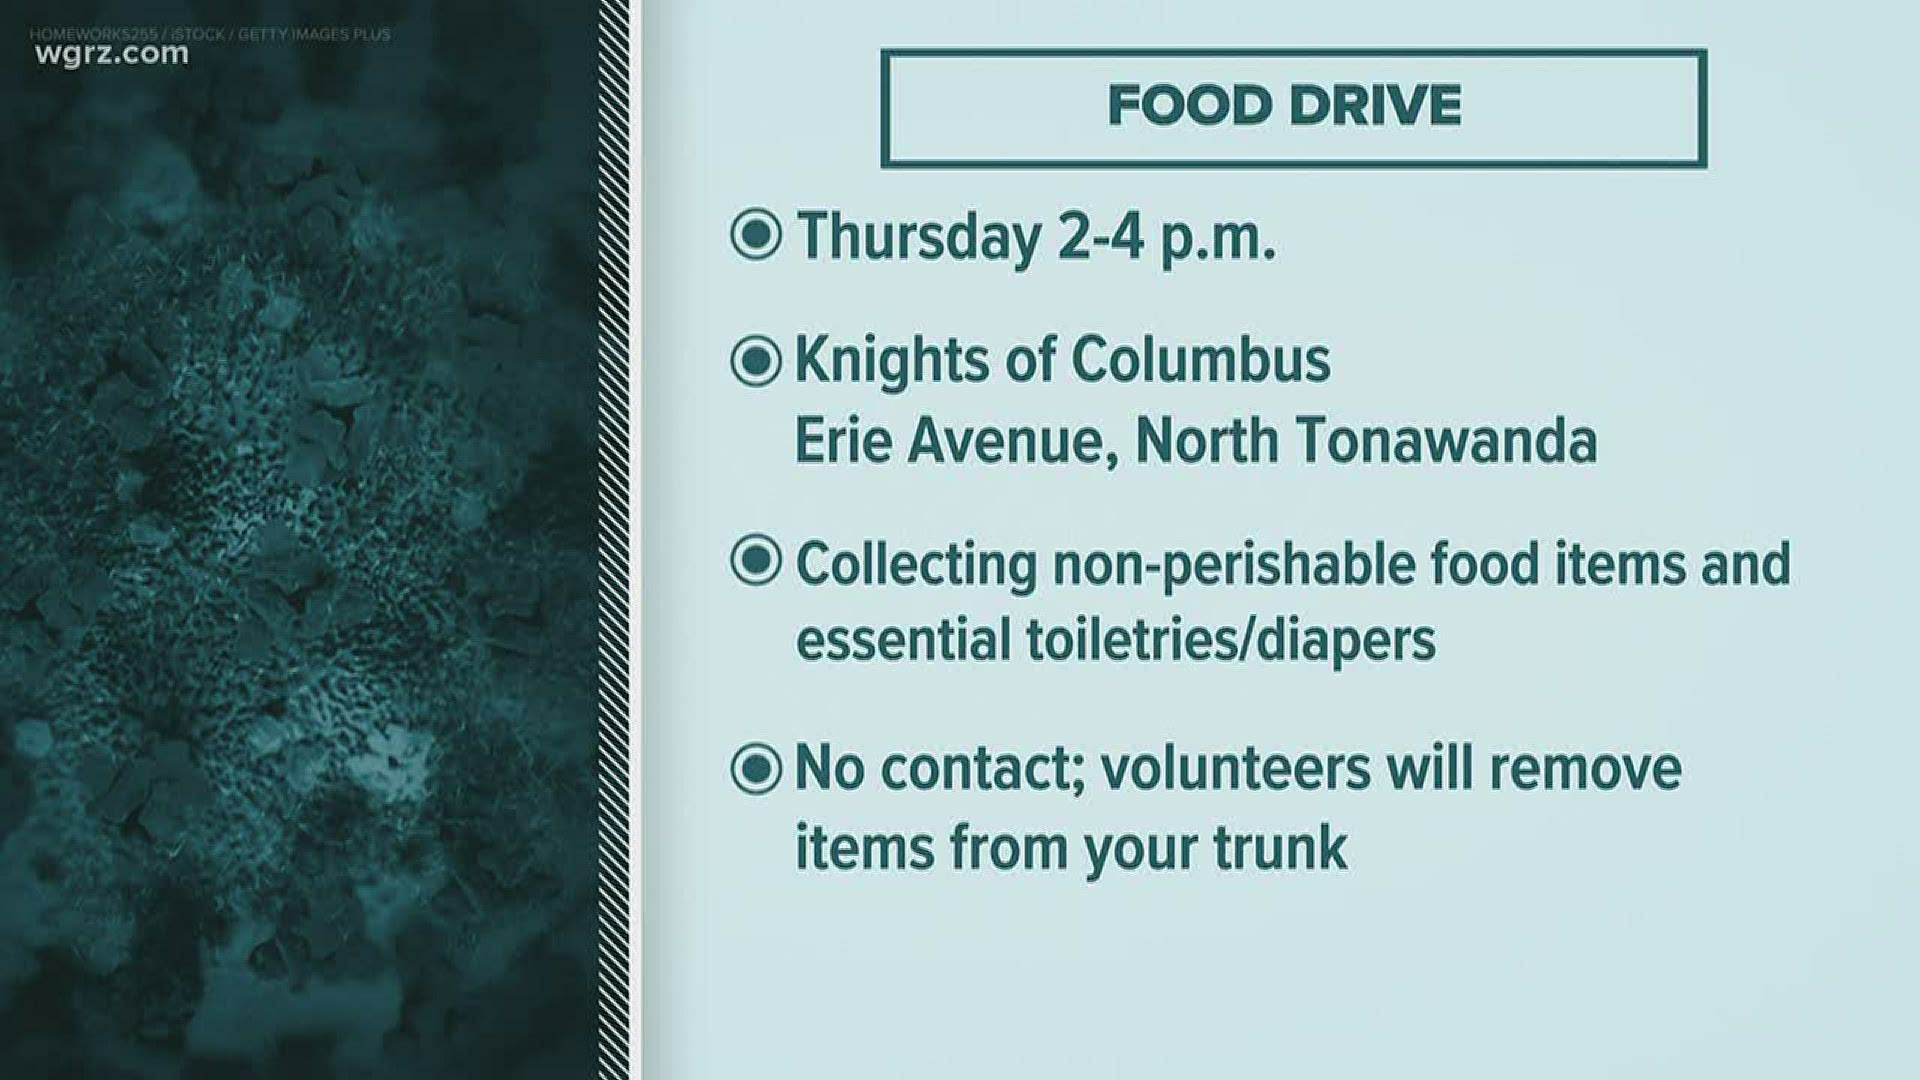 The food drive will be collecting nonperishable food items, along with essential toiletries and diapers.